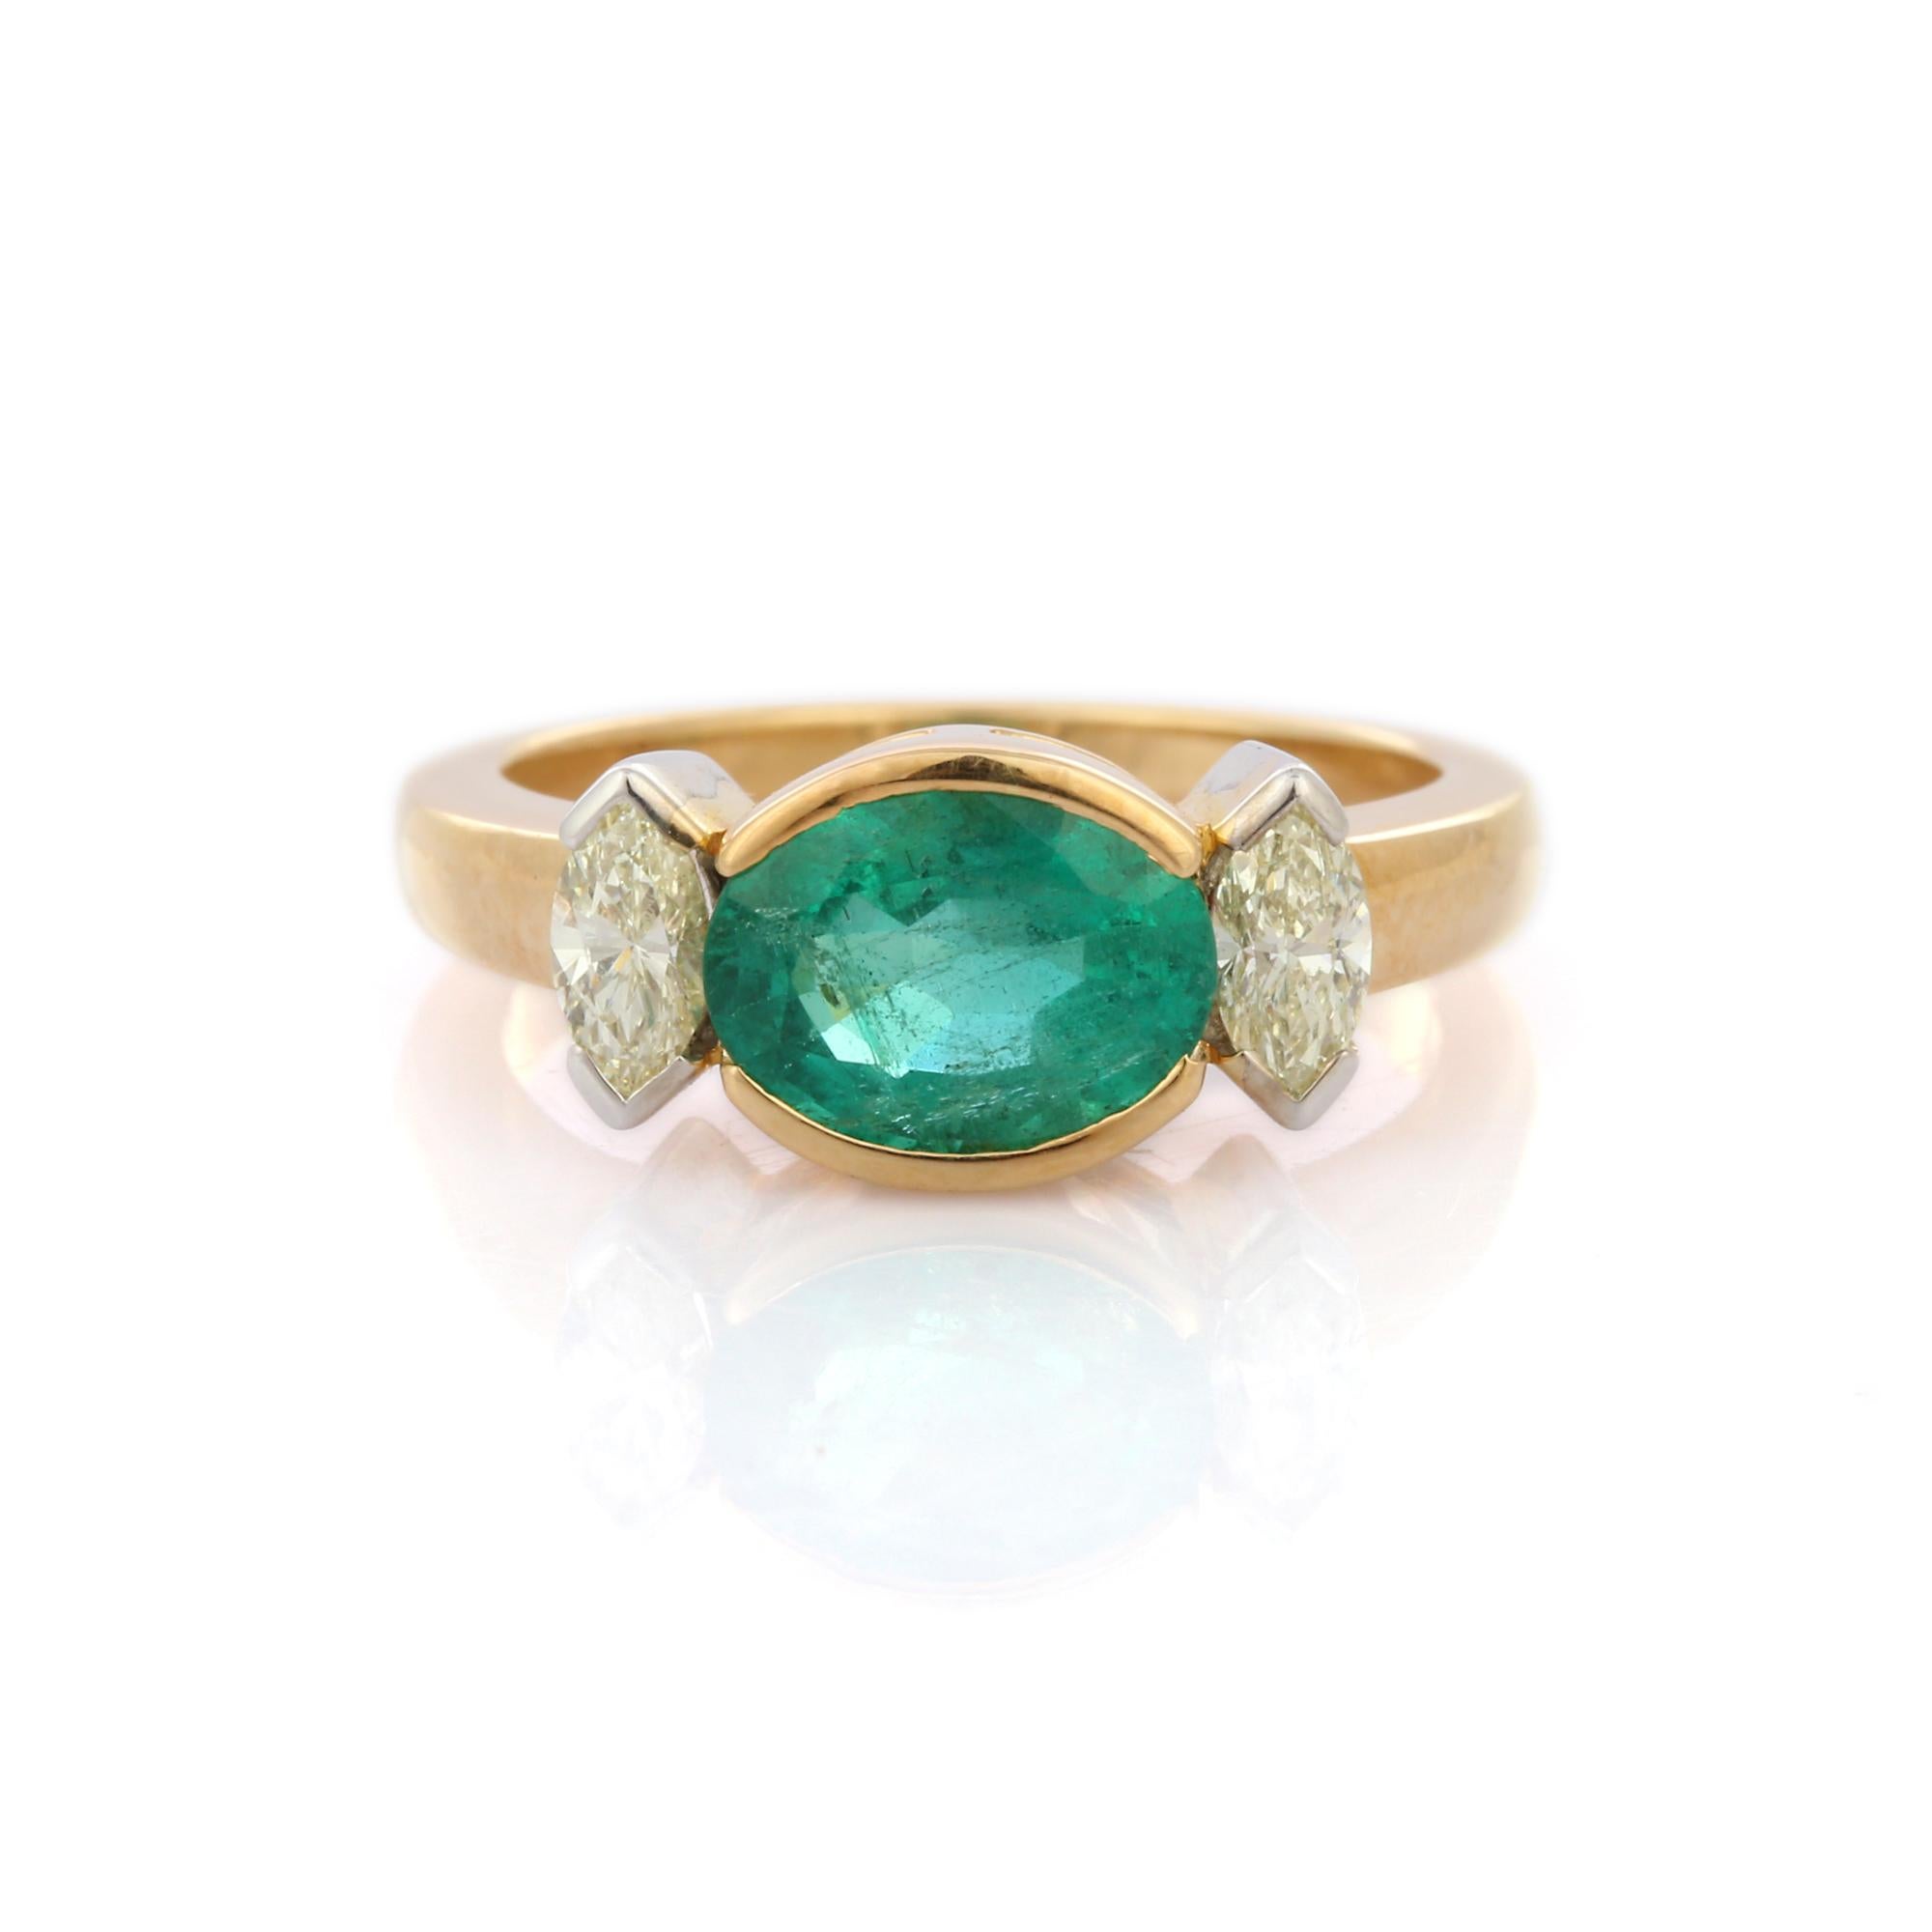 For Sale:  Modern Emerald Diamond Three Stone Ring Engagement Ring in 18K Yellow Gold 7